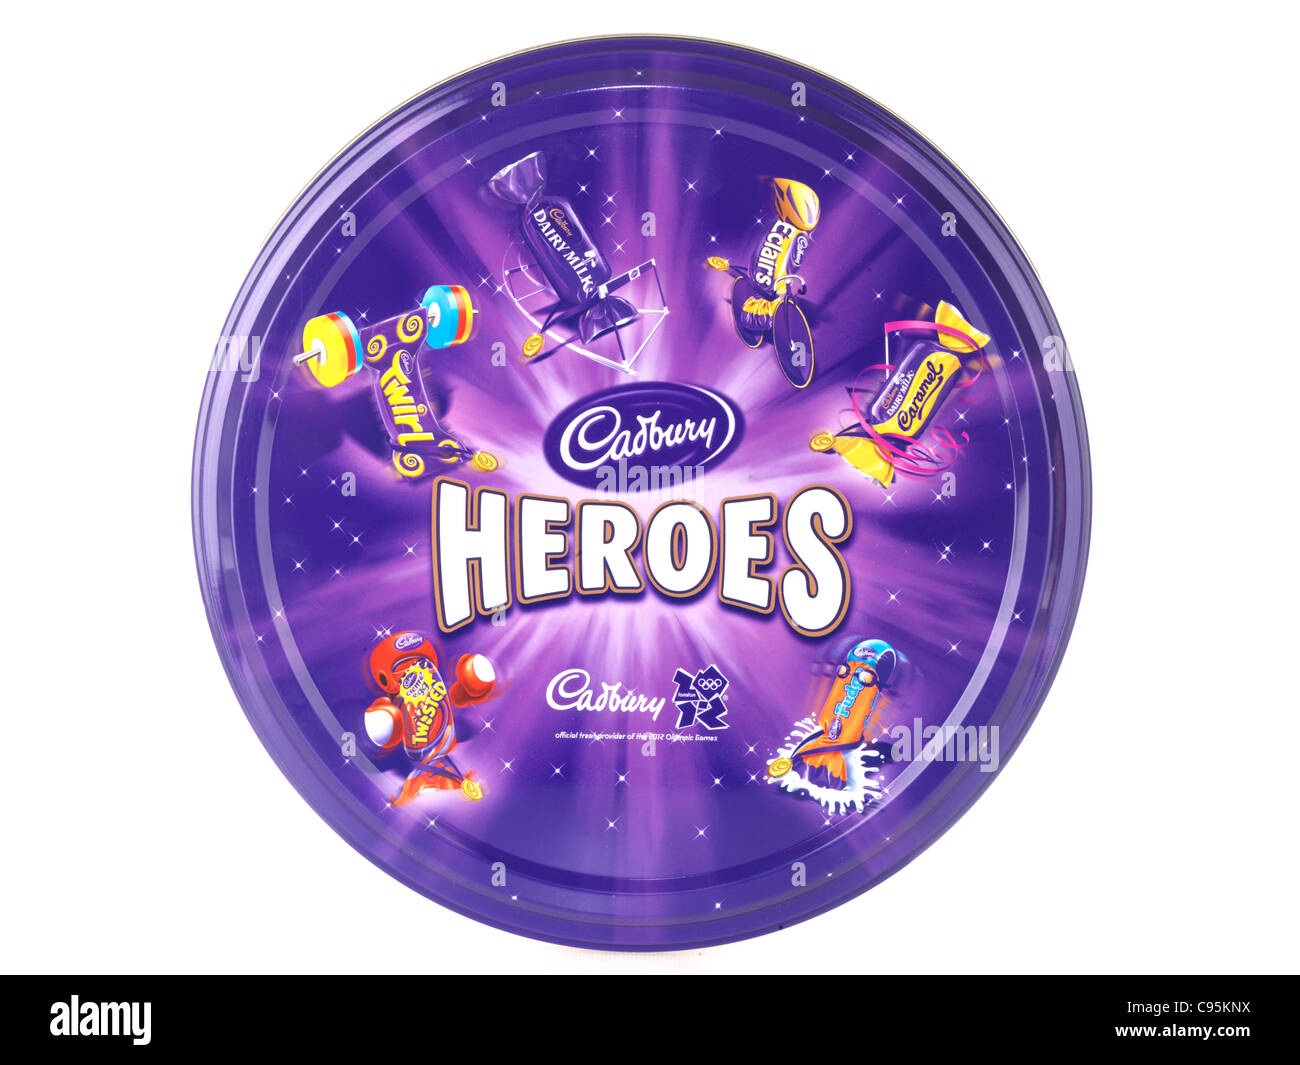 Box of Assorted Cadbury Heroes Chocolates Confectionery Isolated Against A White Background With A Clipping Path And No People Stock Photo